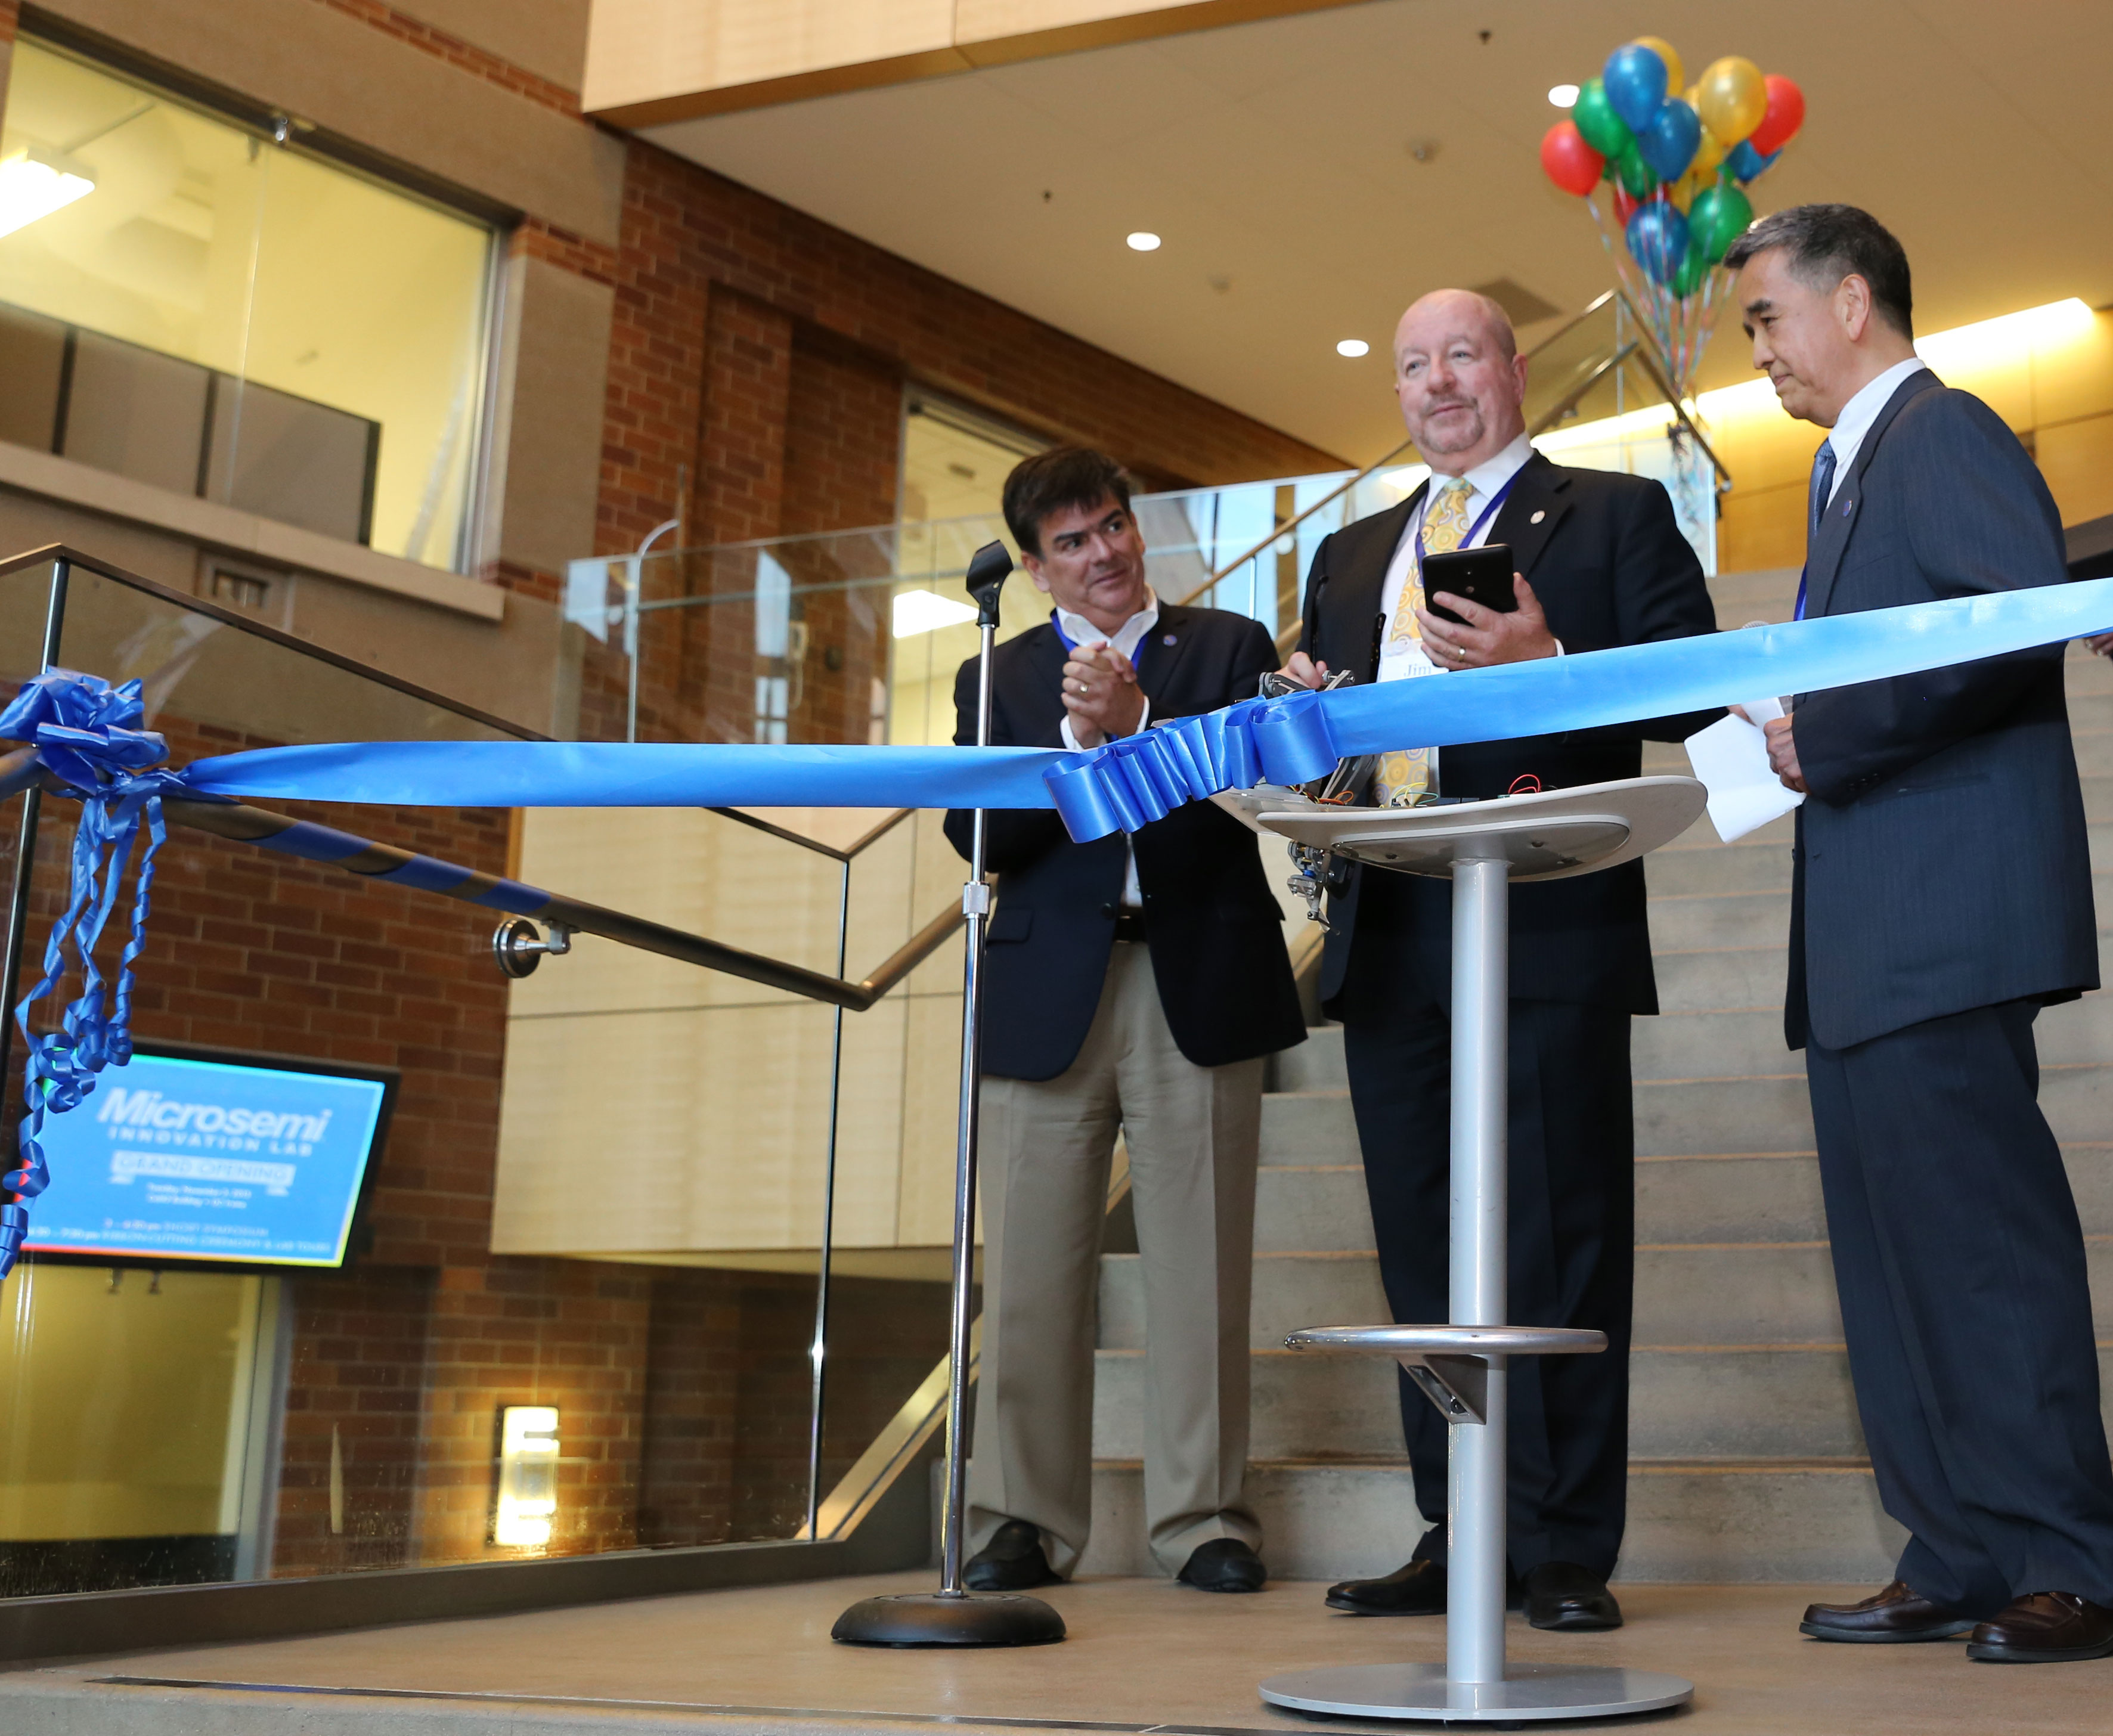 From left: UCI Provost Enrique Lavernia, Microsemi CEO Jim Peterson and Calit2 Director G.P. Li prepare to cut the ribbon officially opening the Microsemi Innovation Lab at Calit2